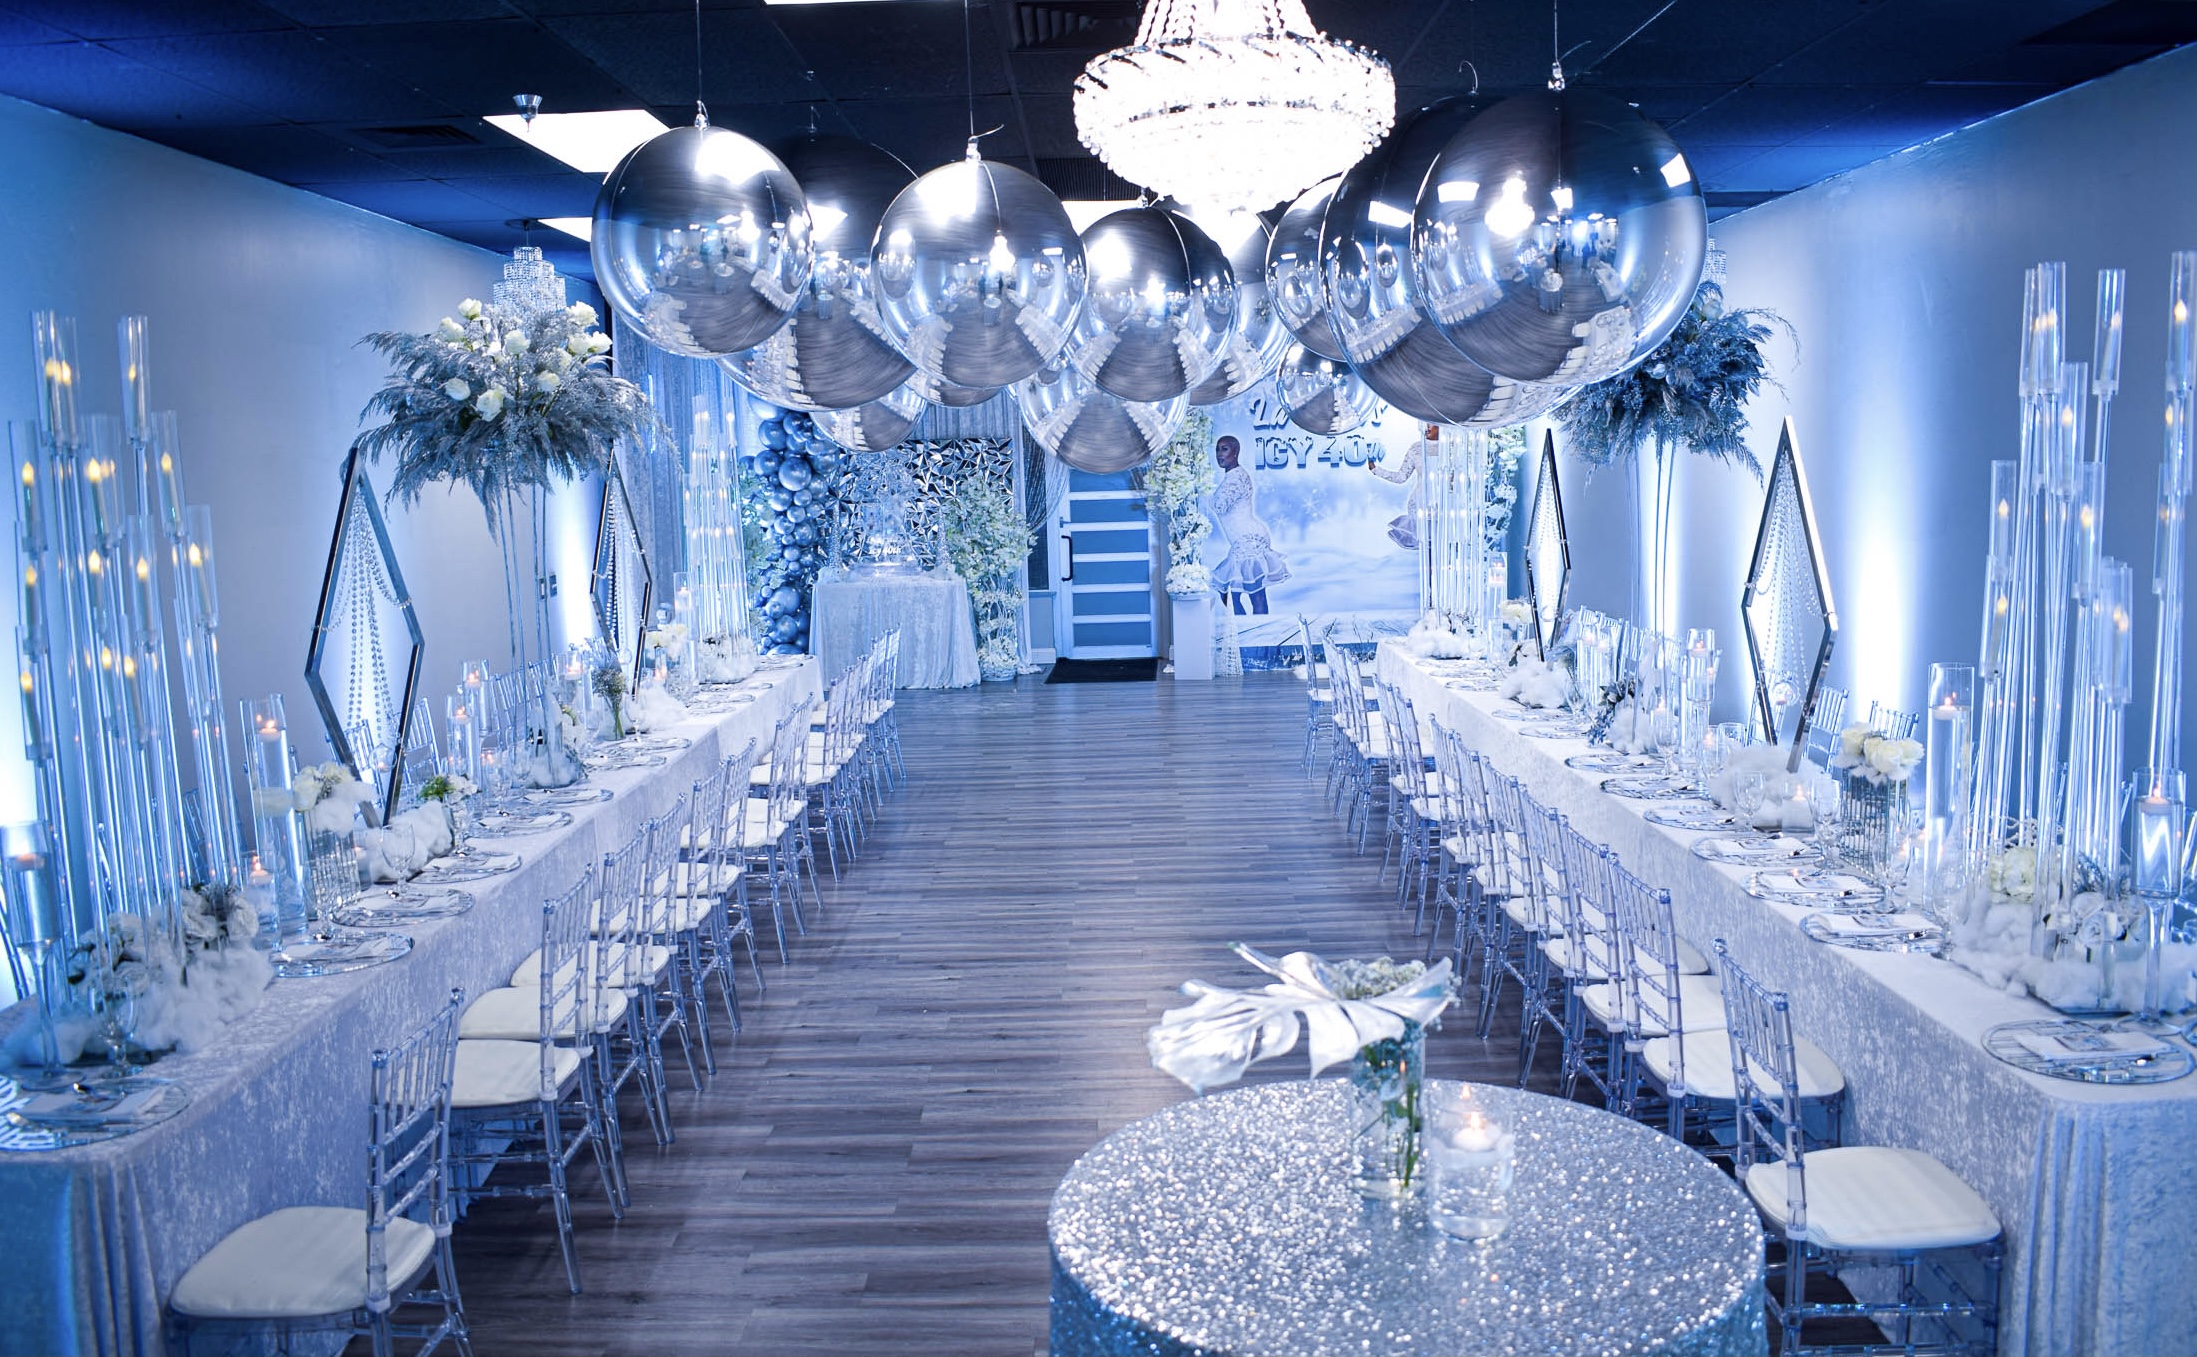 Party Decoration Luxury Packages with Delivery & Setup at Your